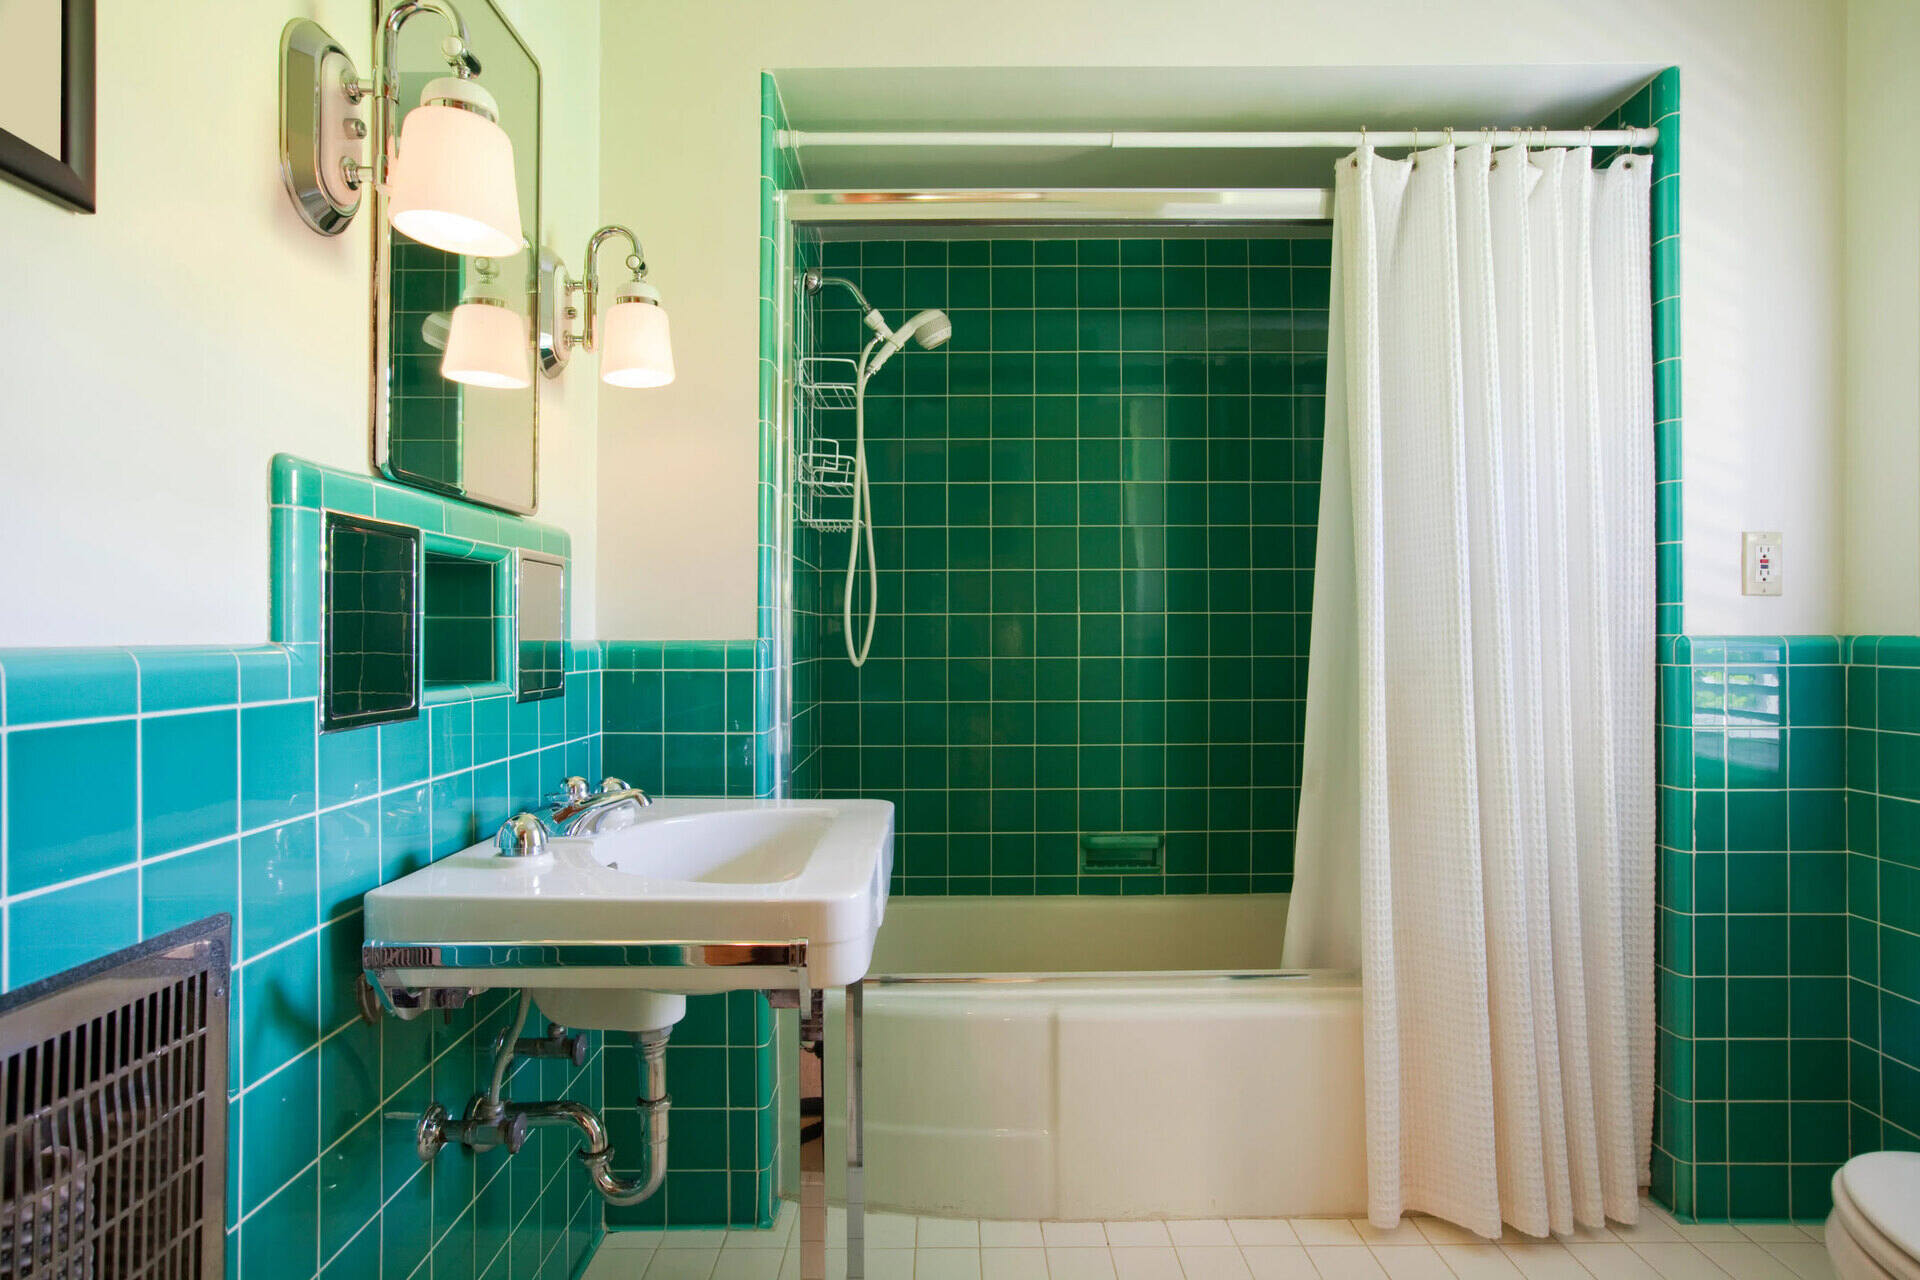 How Often Should You Change Shower Curtains